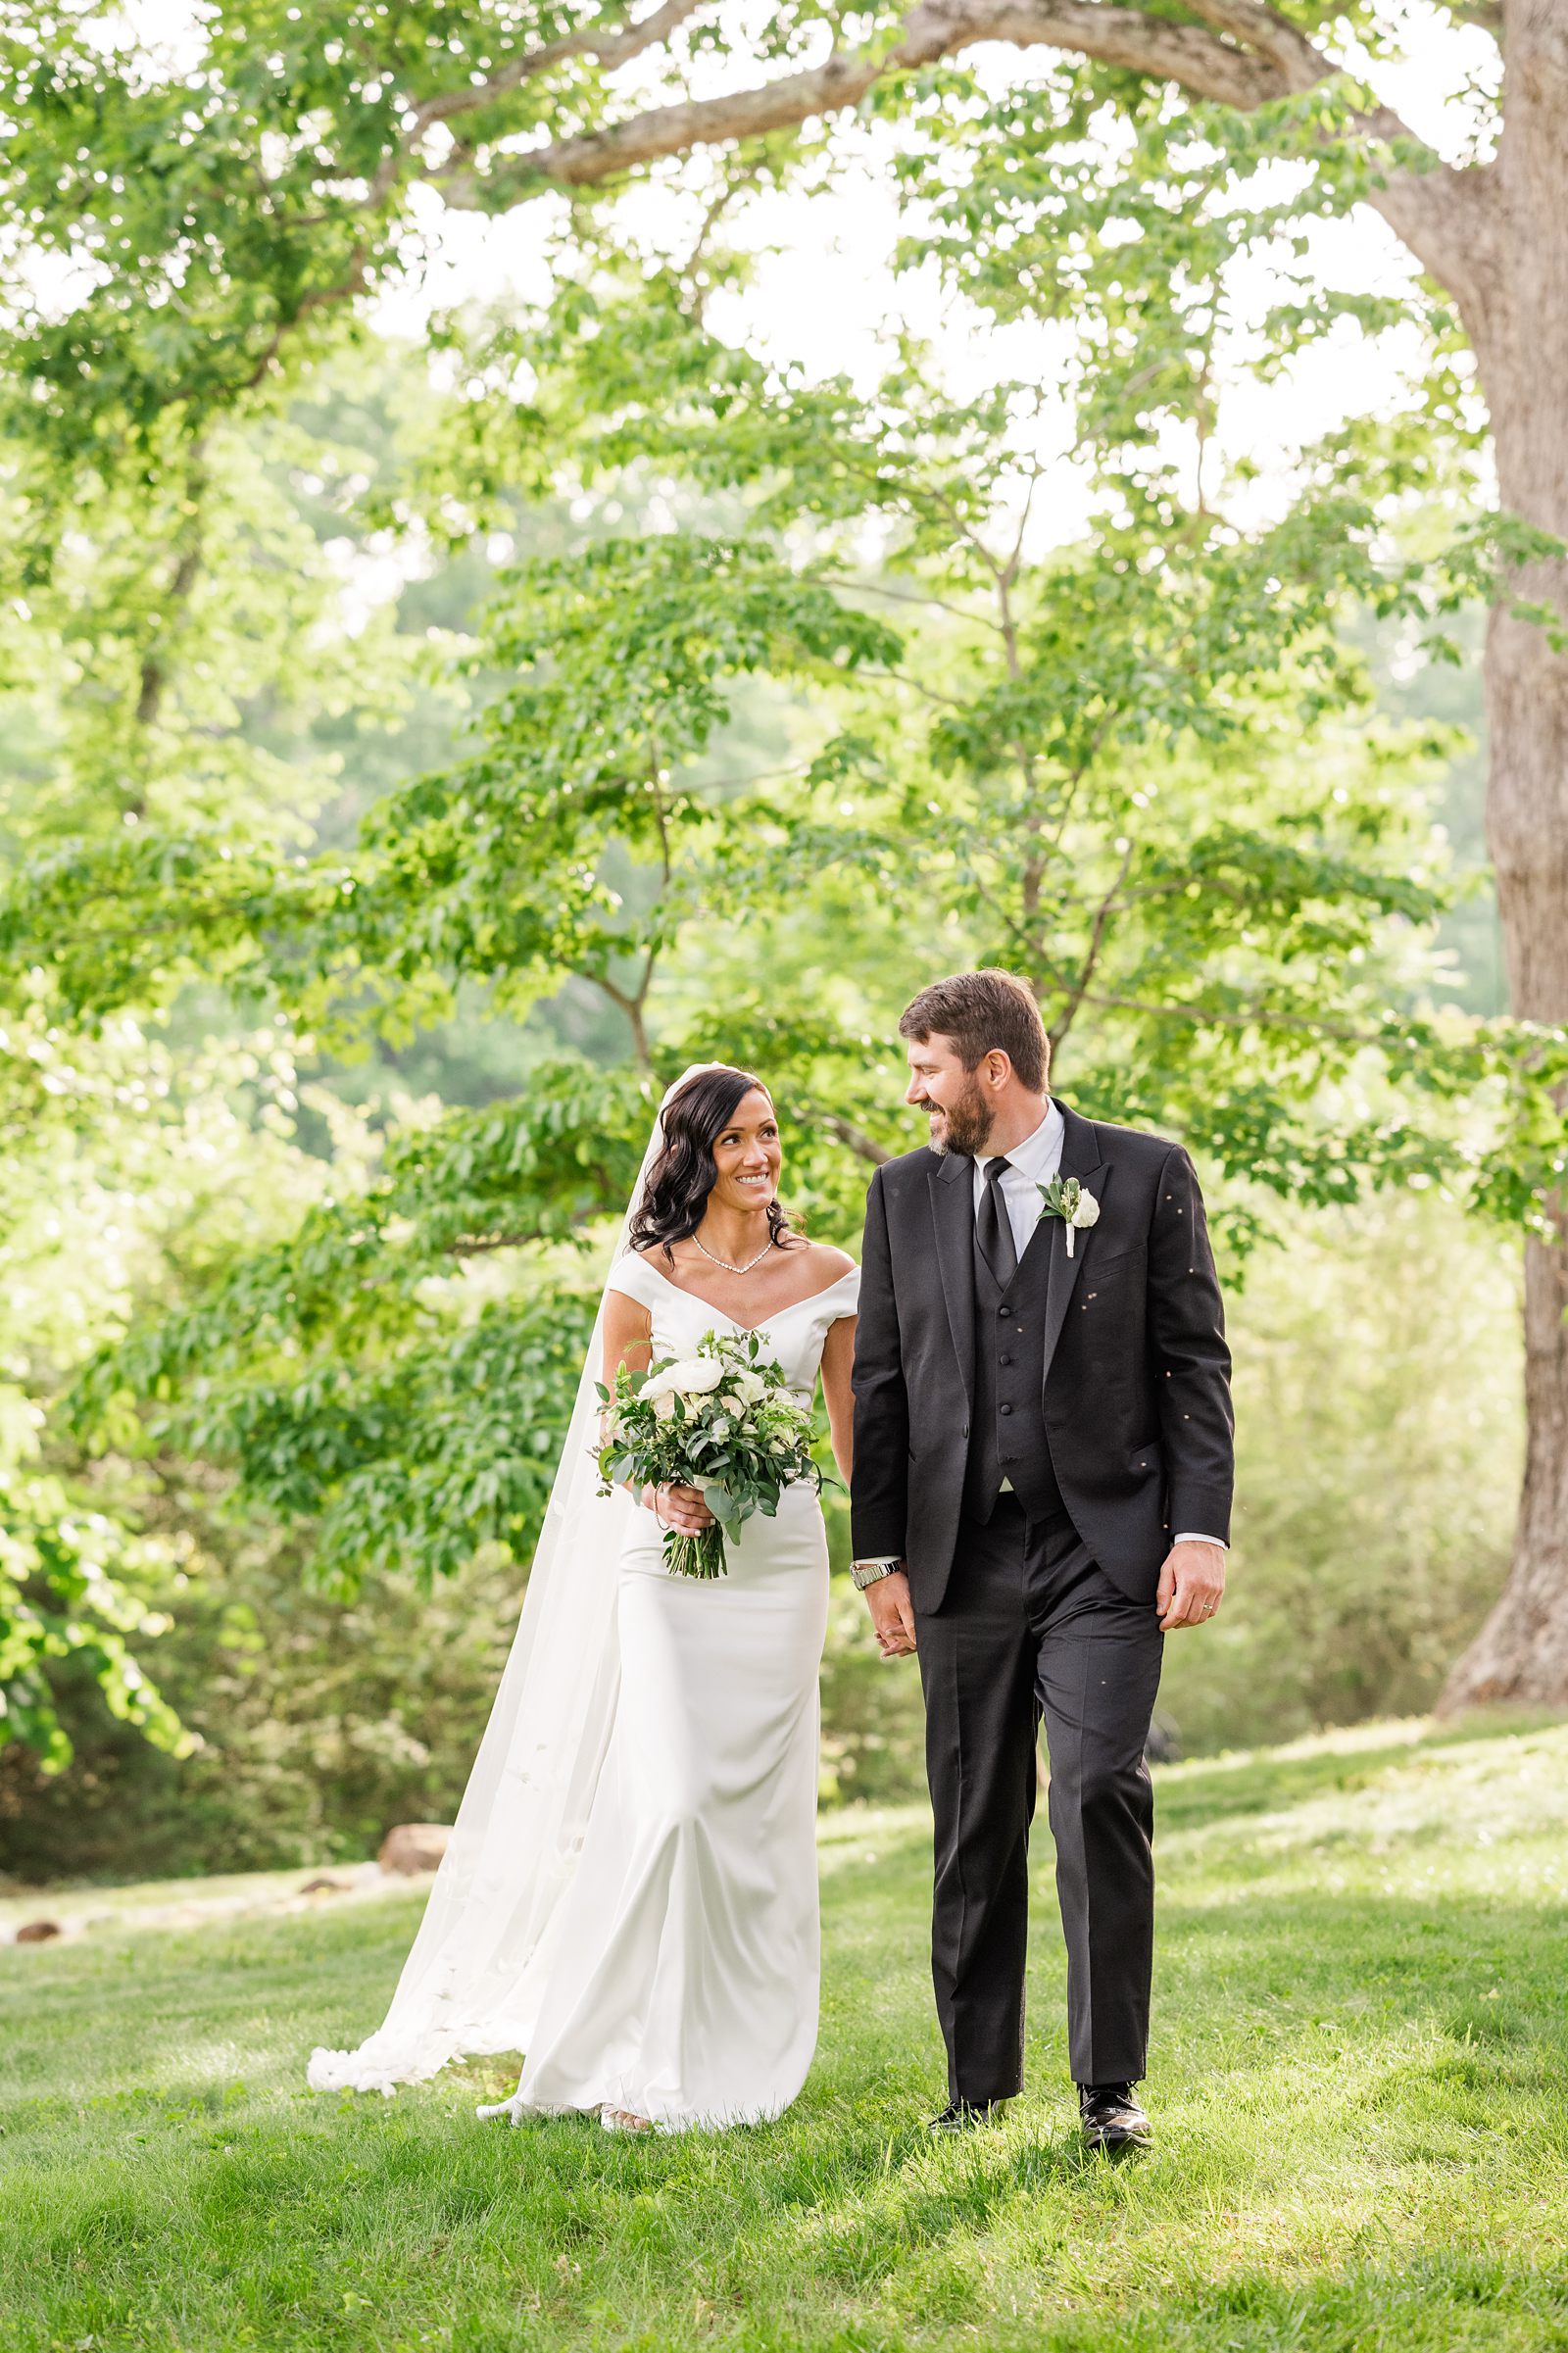 Bride and Groom portraits with veil at Spring Wedding by Virginia Wedding photographer Kailey Brianne Photography 